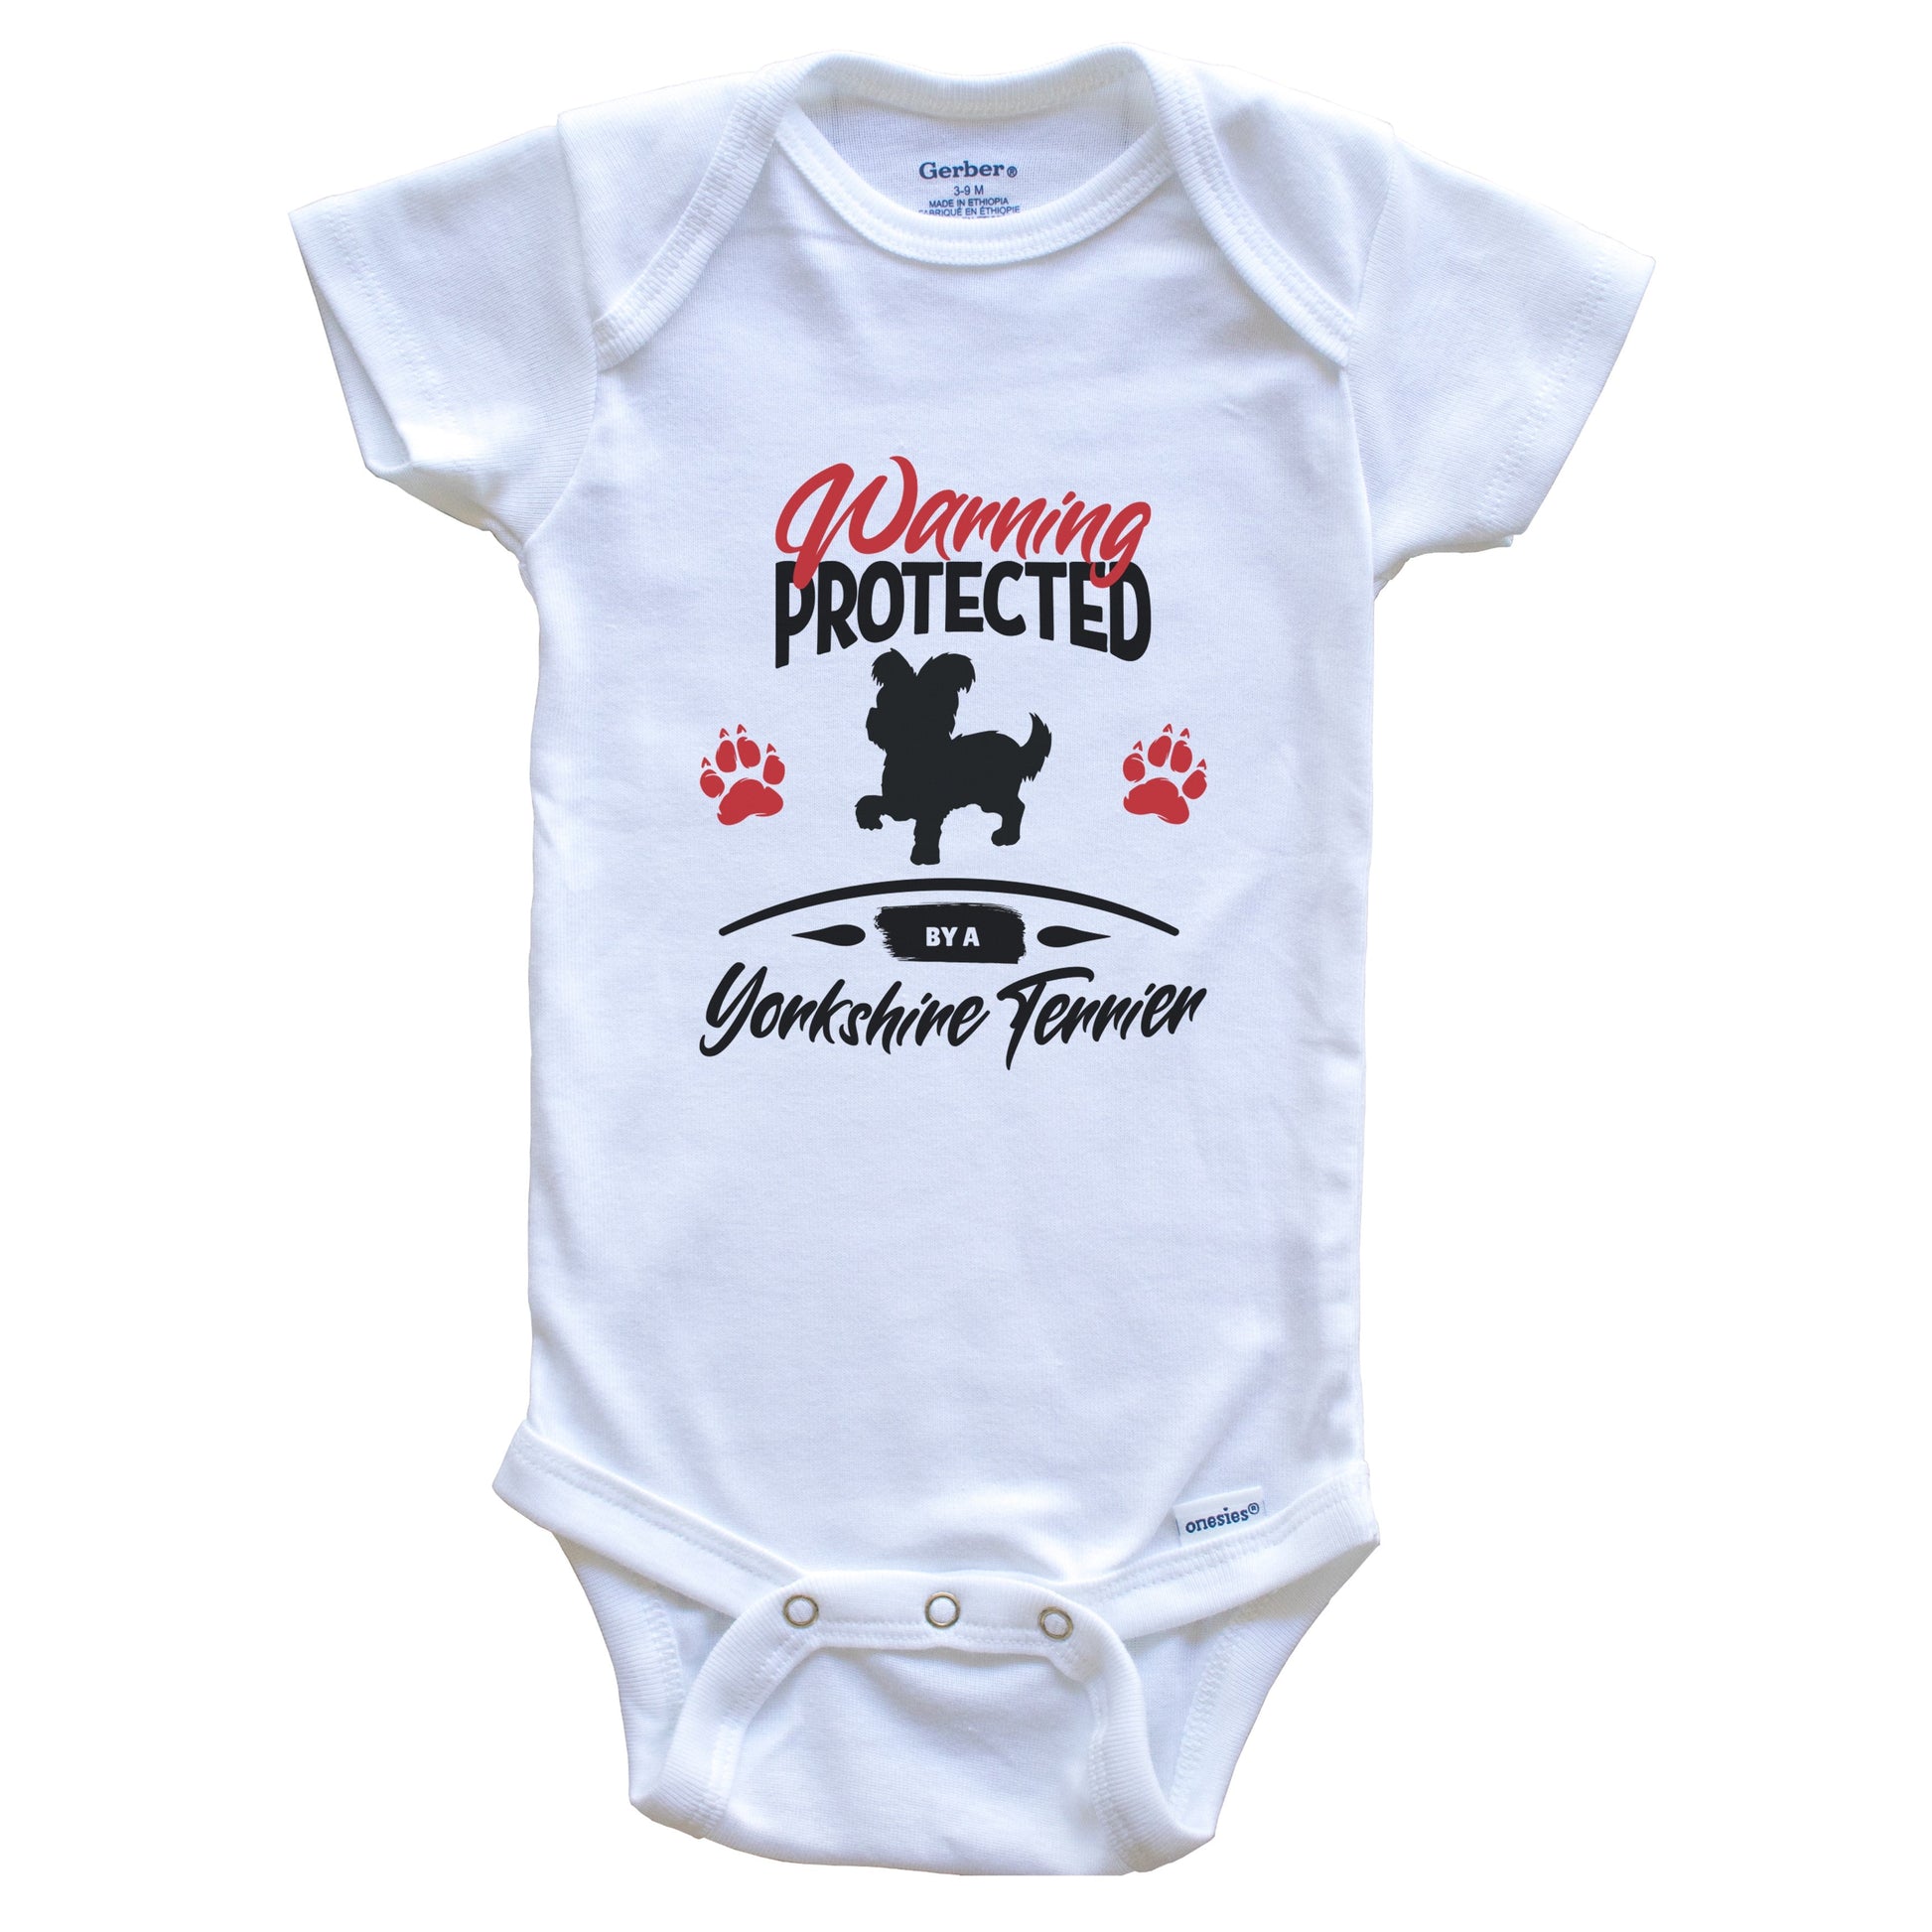 Warning Protected By A Yorkshire Terrier Funny Dog Owner Baby Bodysuit